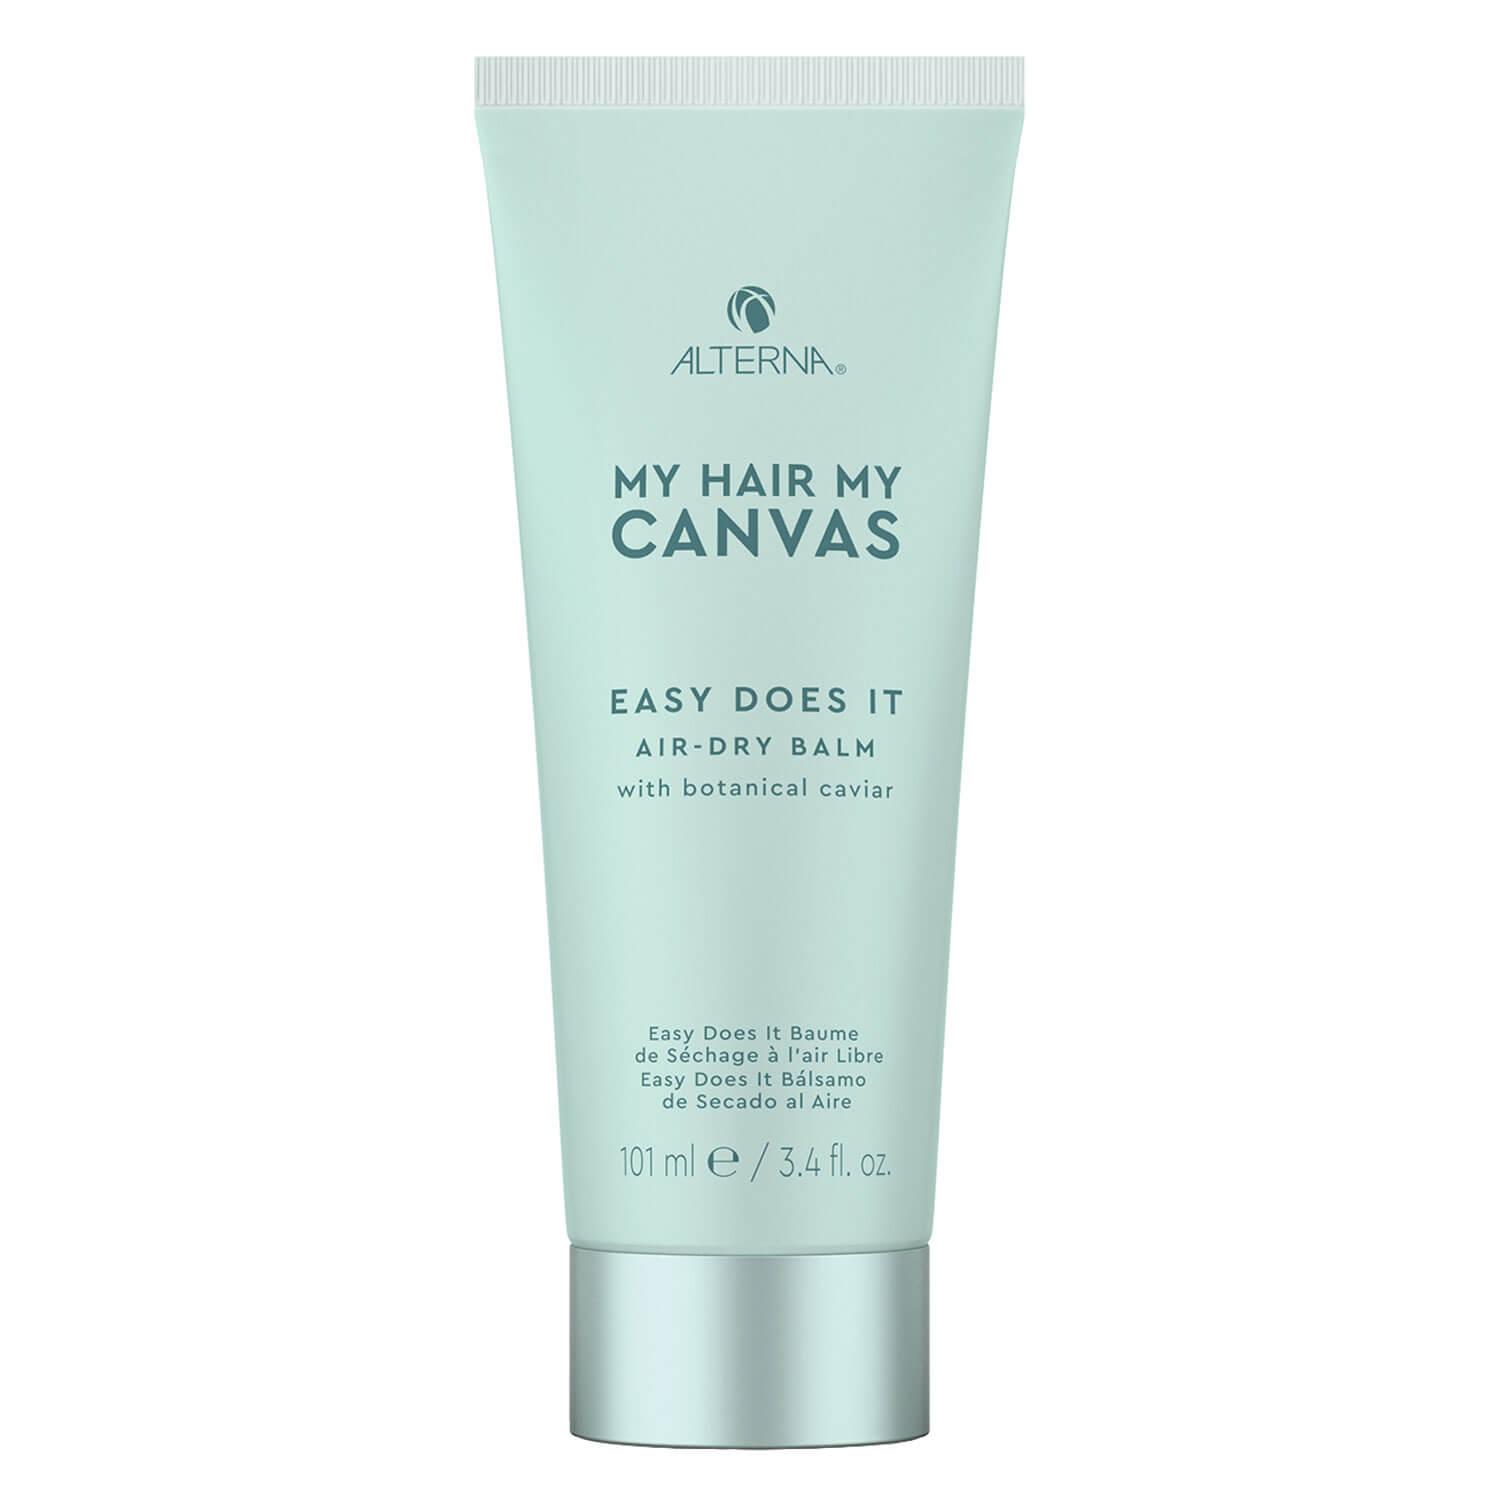 My Hair My Canvas - Easy Does It Air Dry Balm